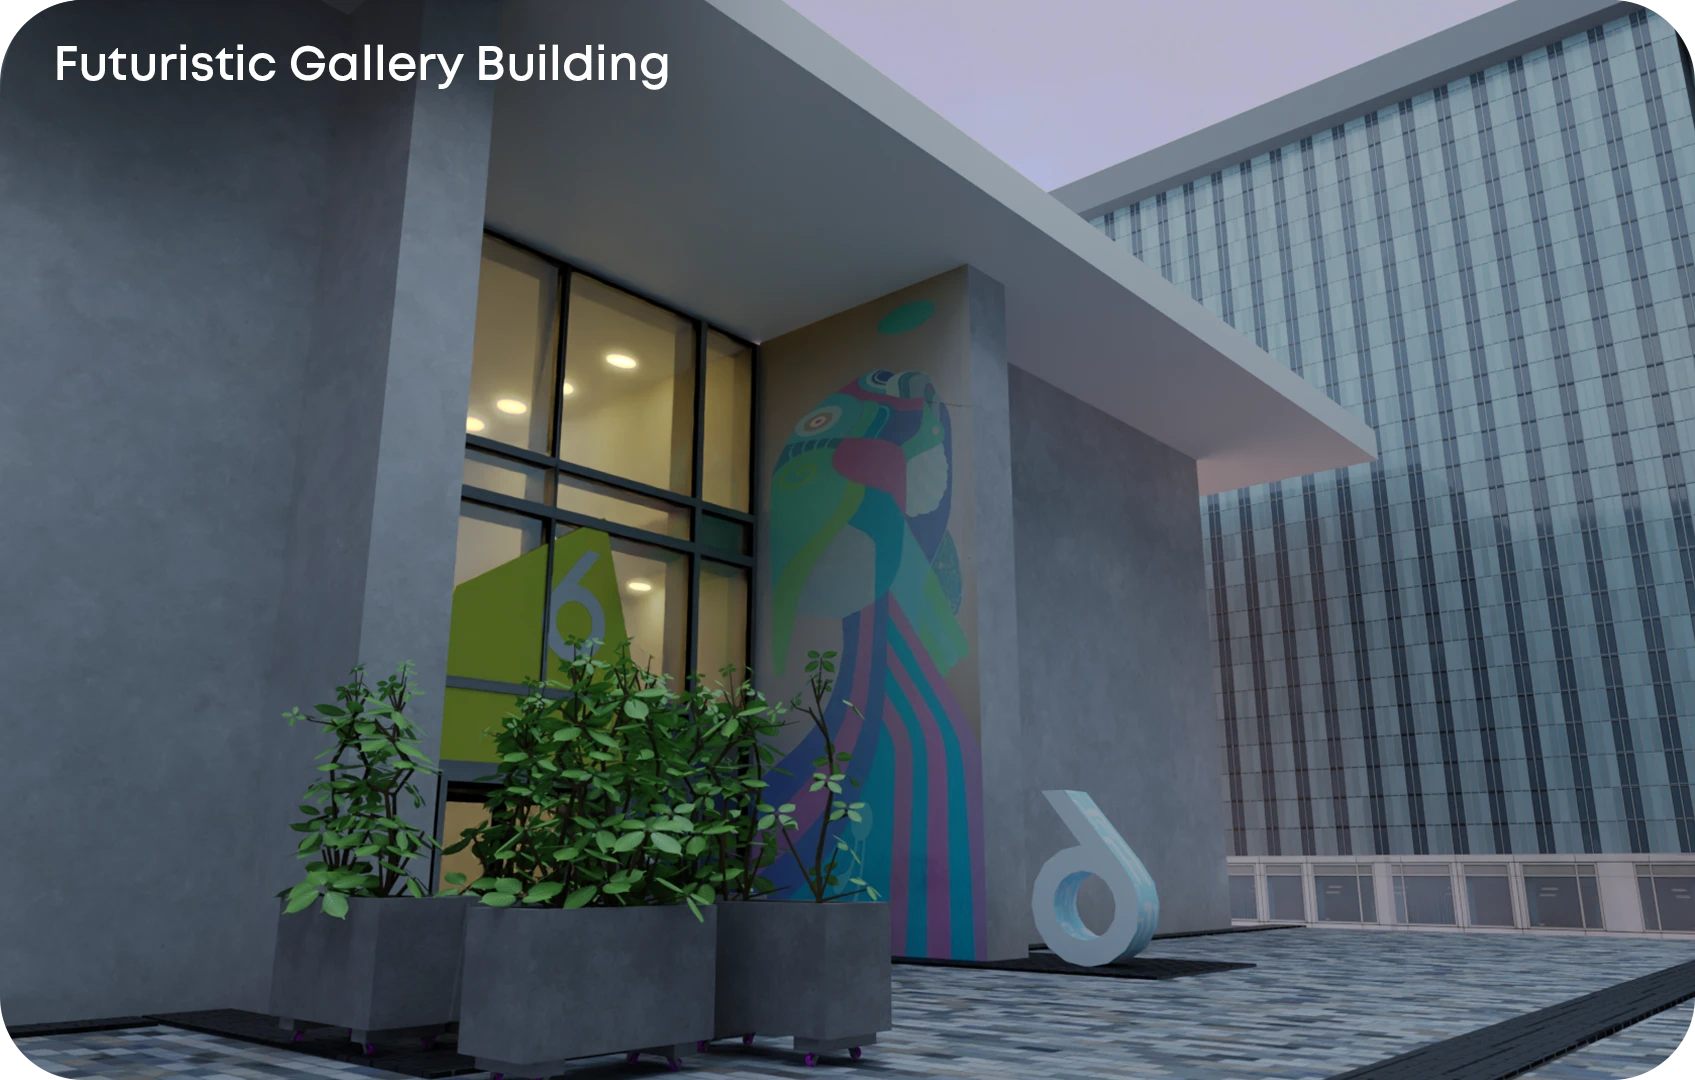 3798-futuristic-gallery-building-1.png